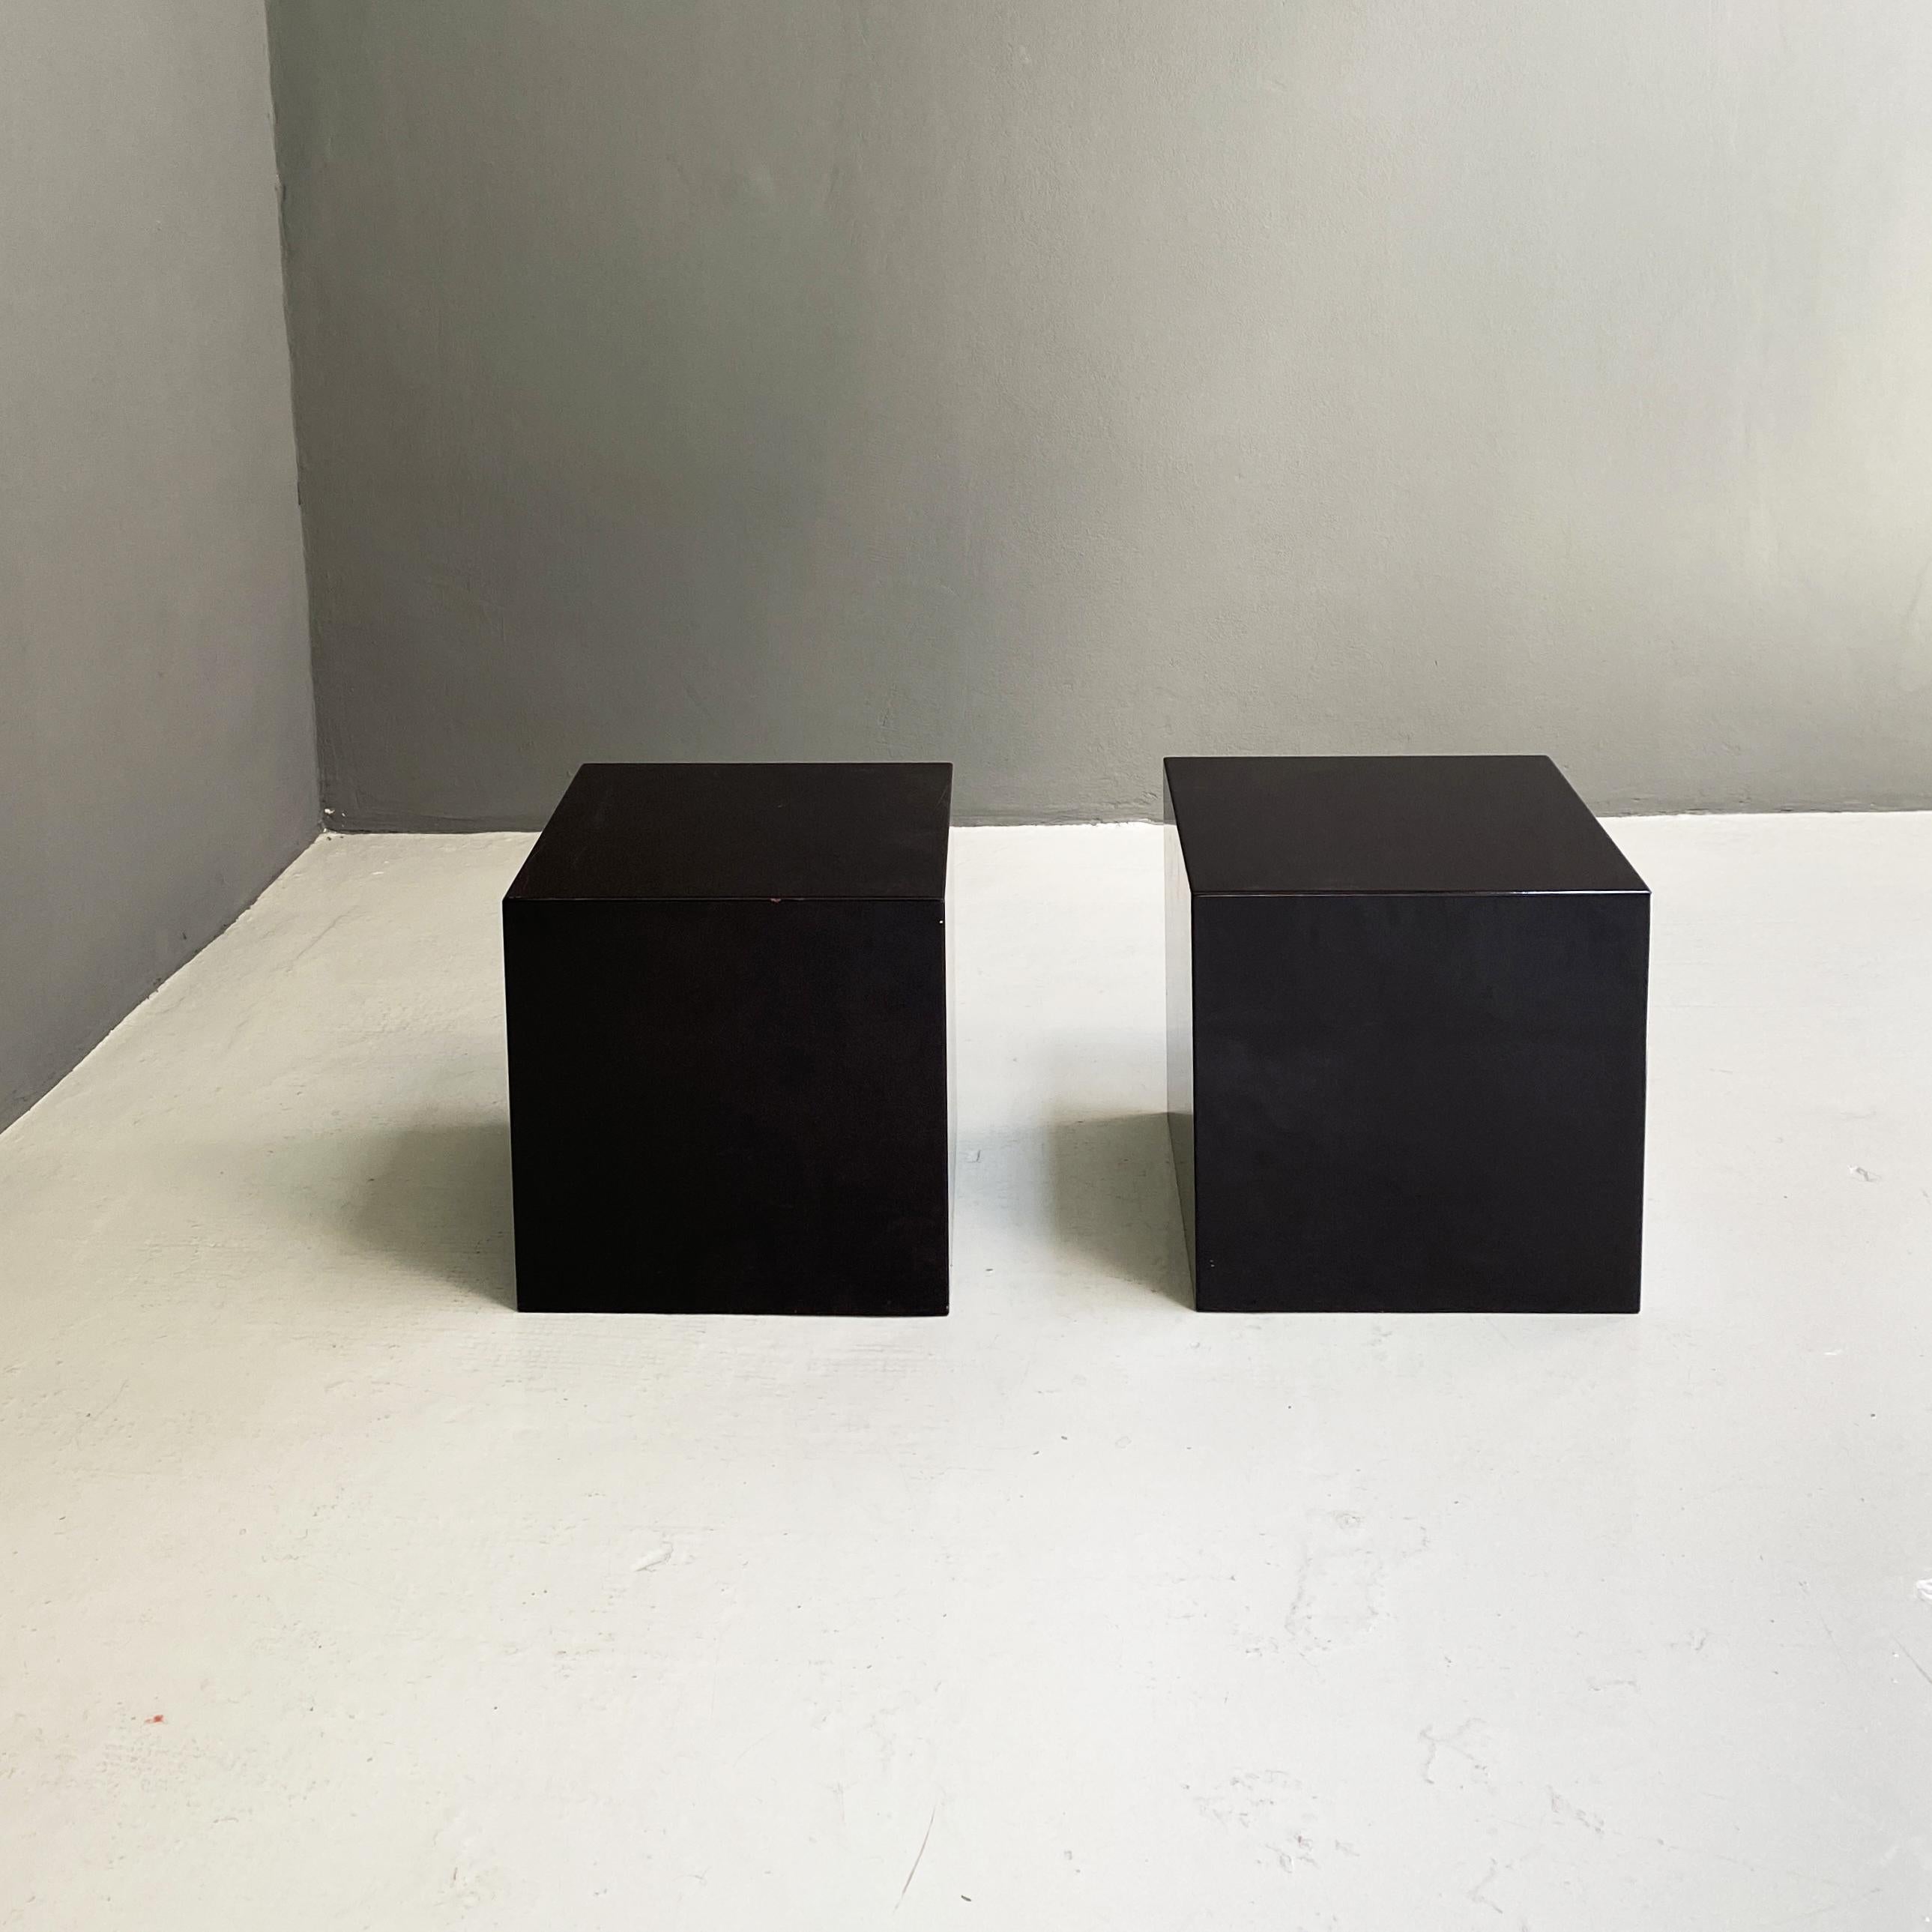 Cube-Shaped Coffee Tables or Bedside Tables in Dark Brown Lacquered Wood, 1990s  1